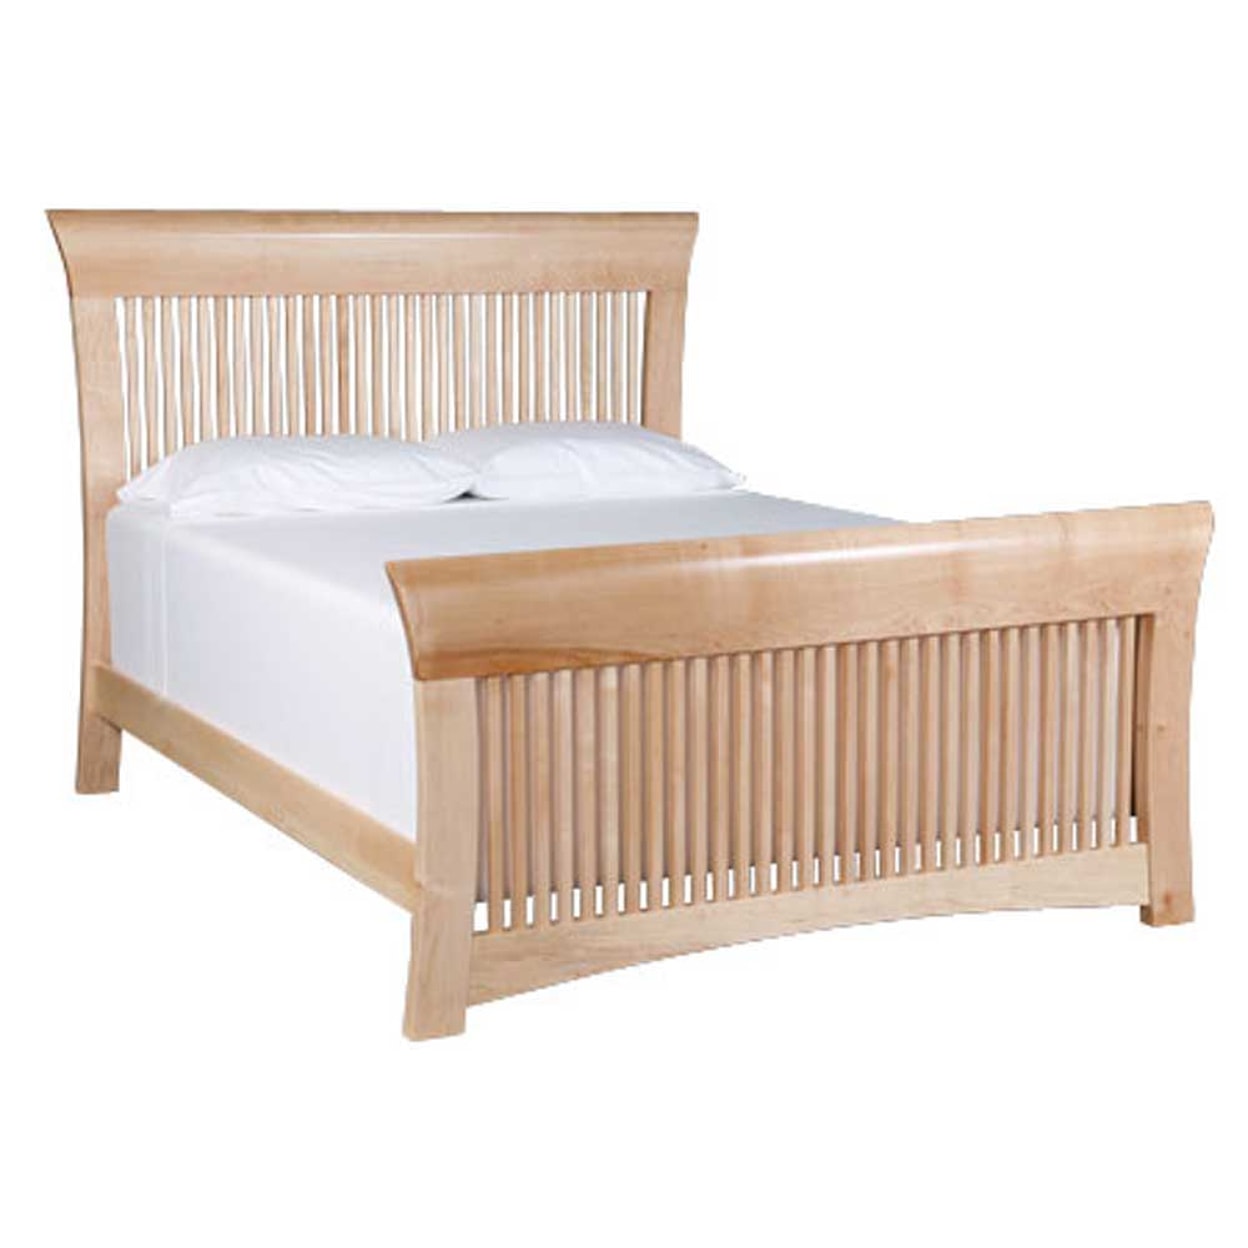 Simply Amish Loft King Spindle Bed